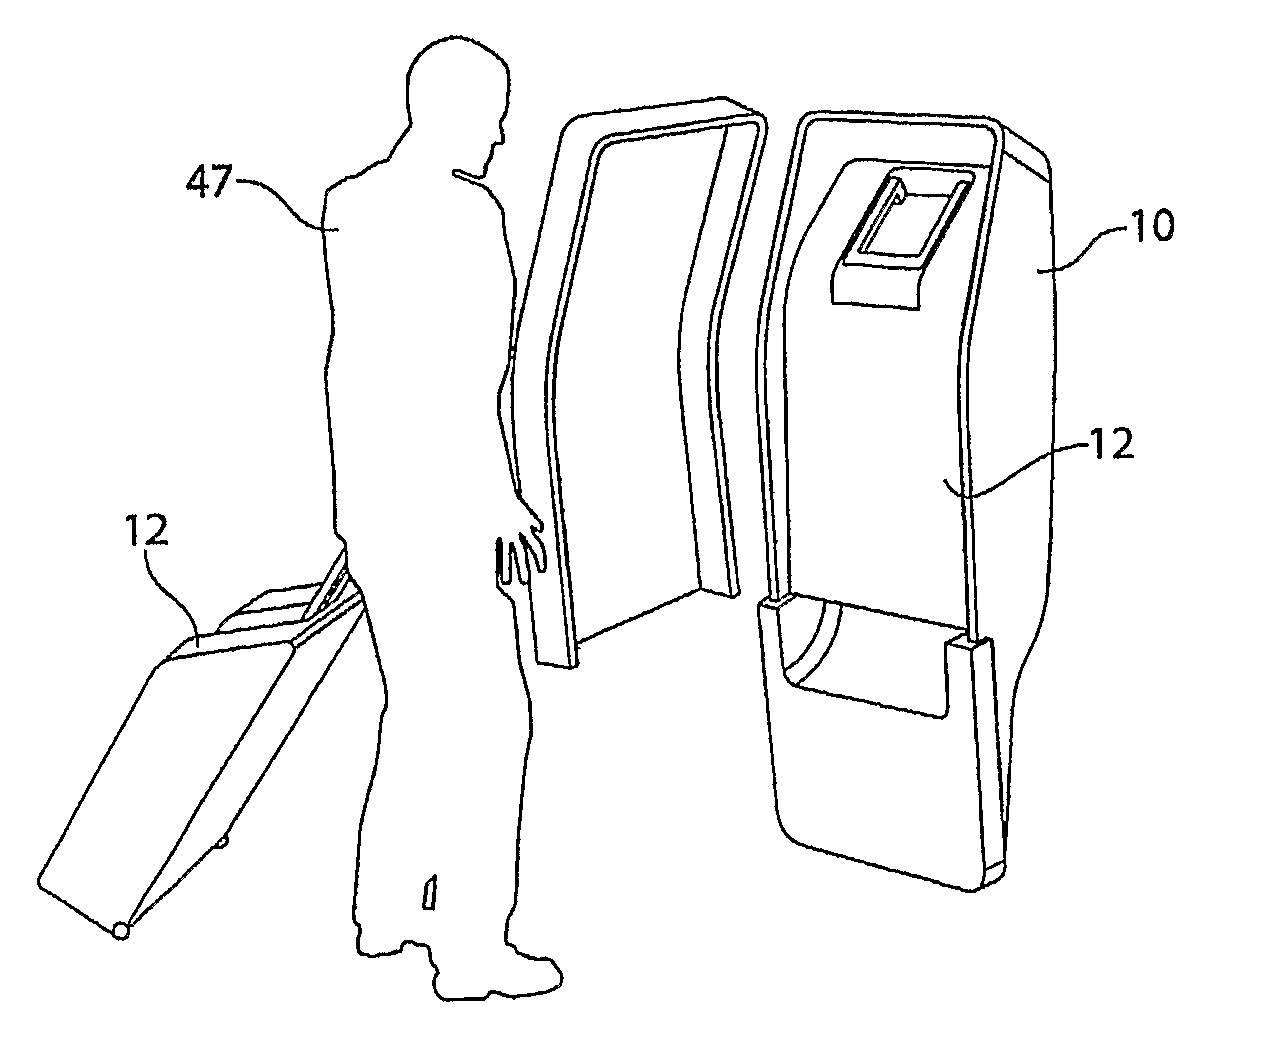 Systems, methods and devices for dispensing products from a kiosk